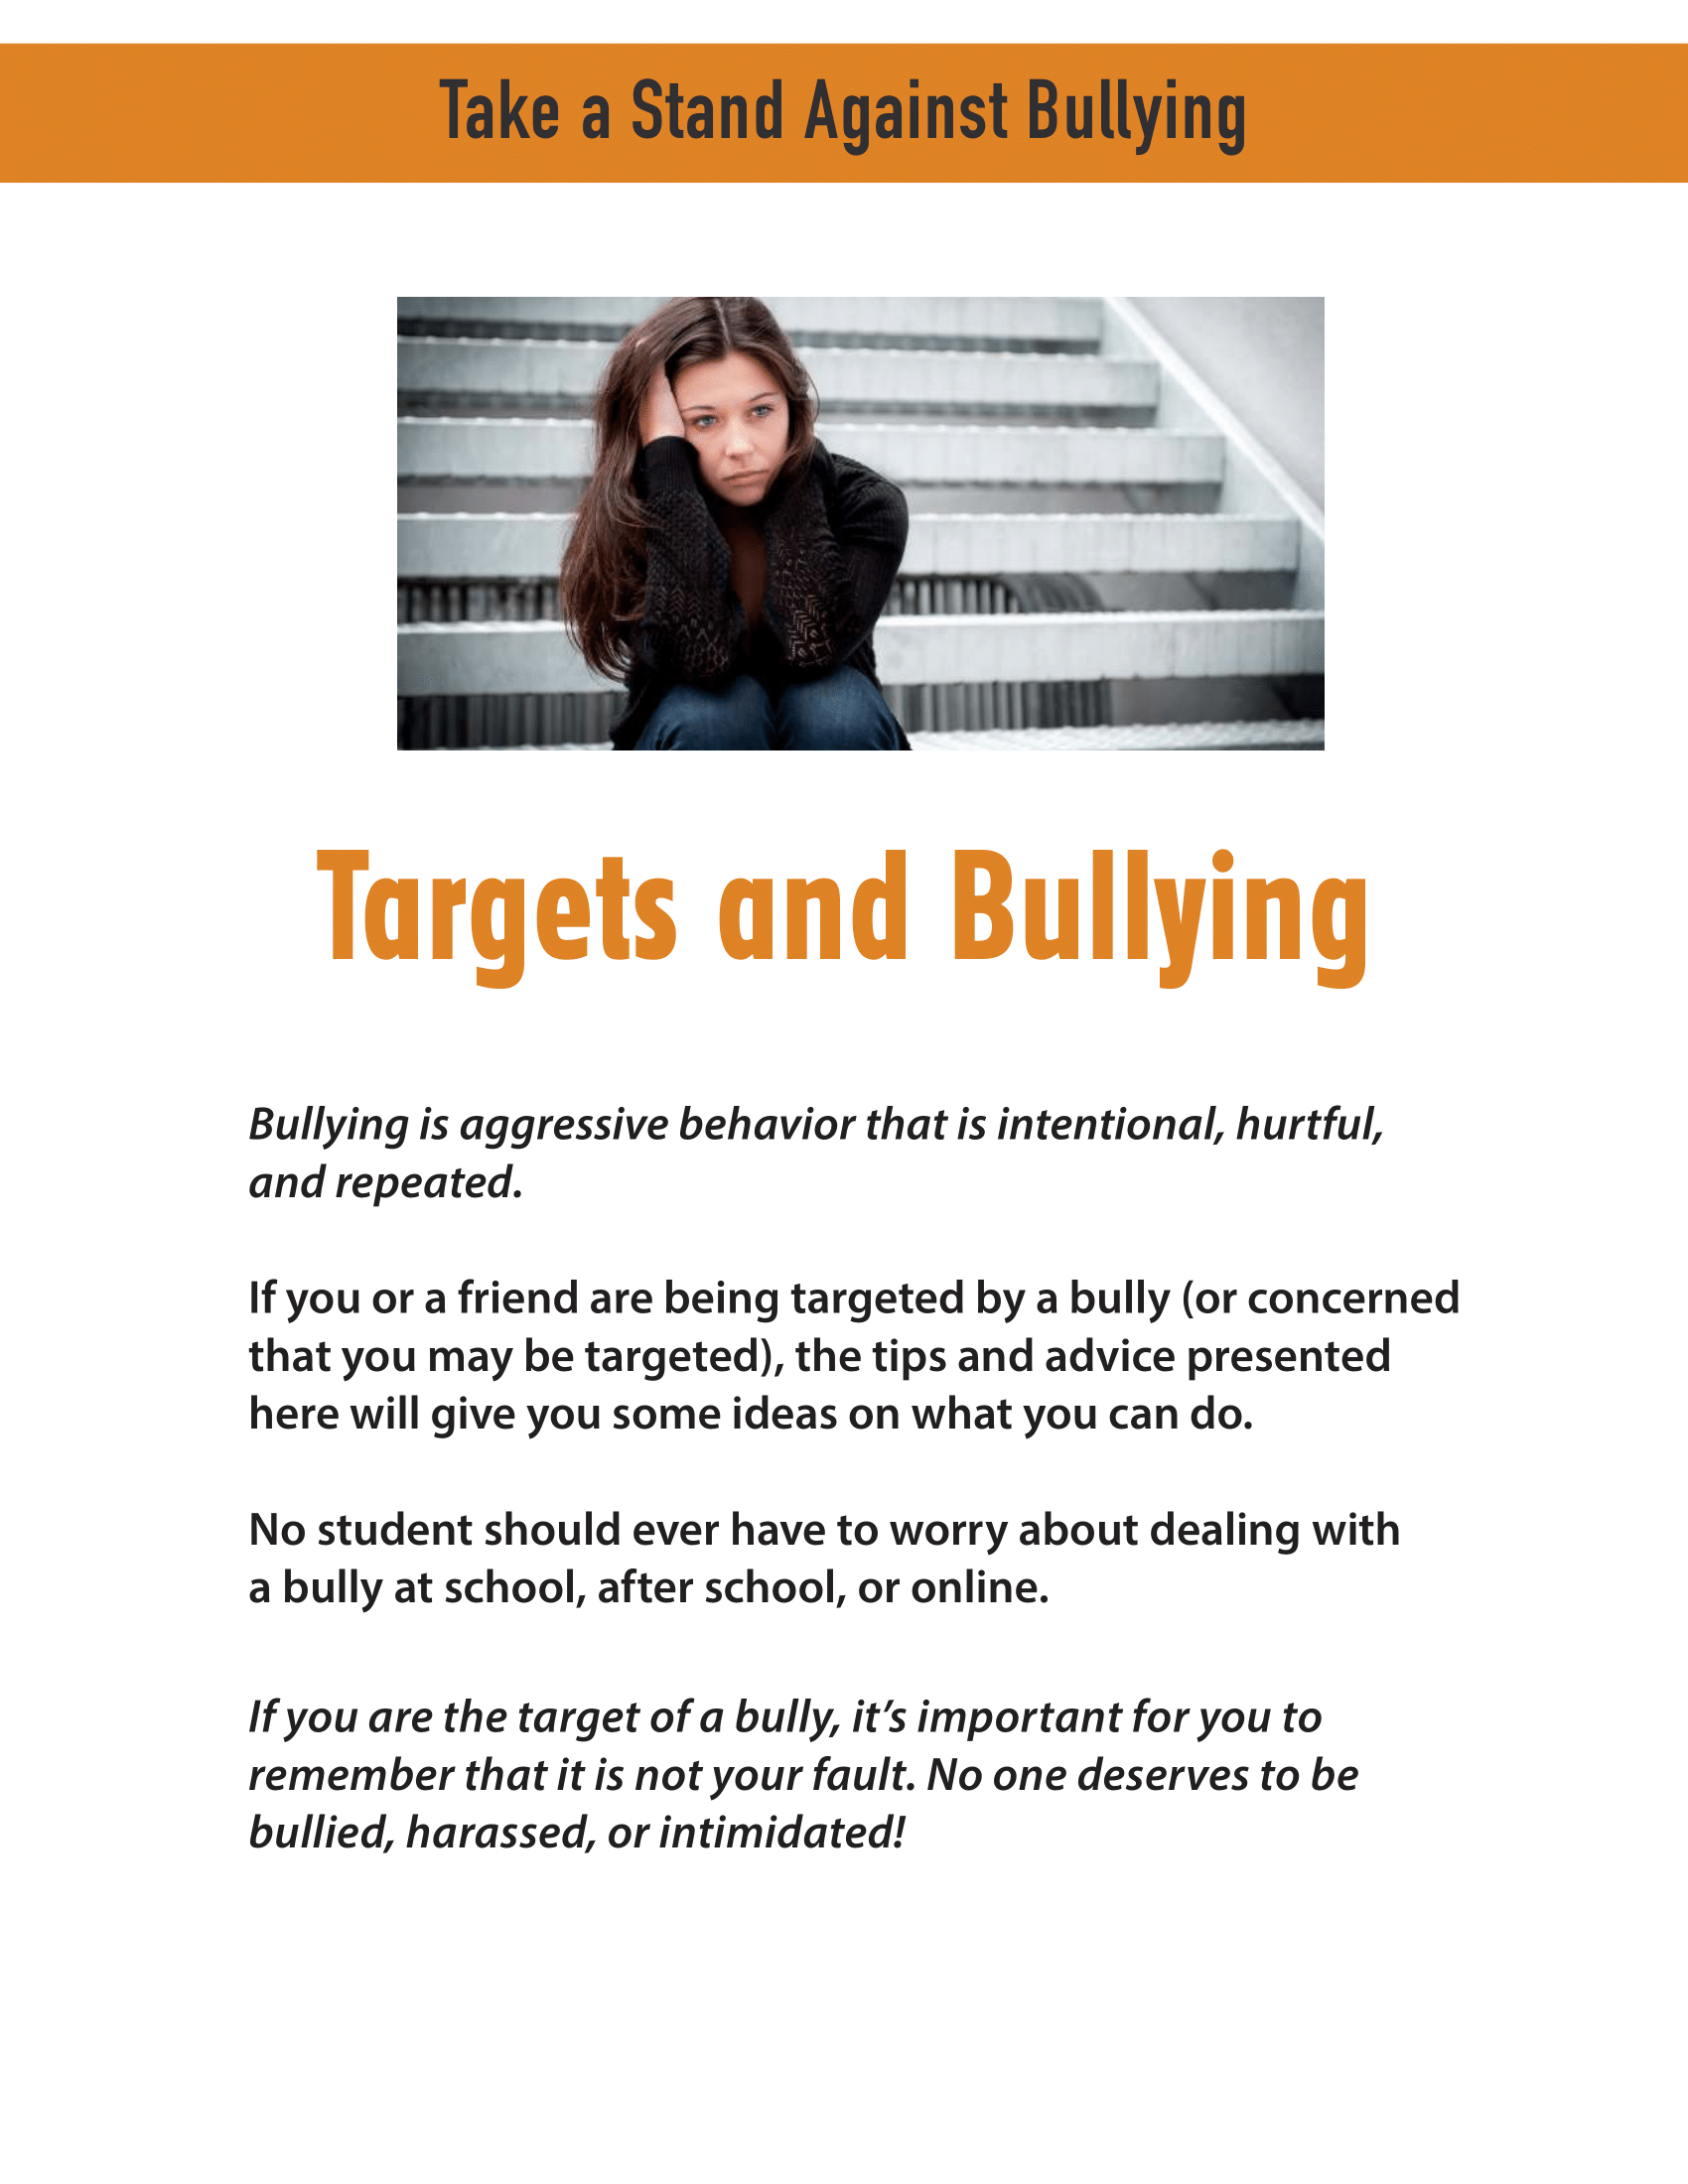 Take a Stand Against Bullying - Targets and Bullying